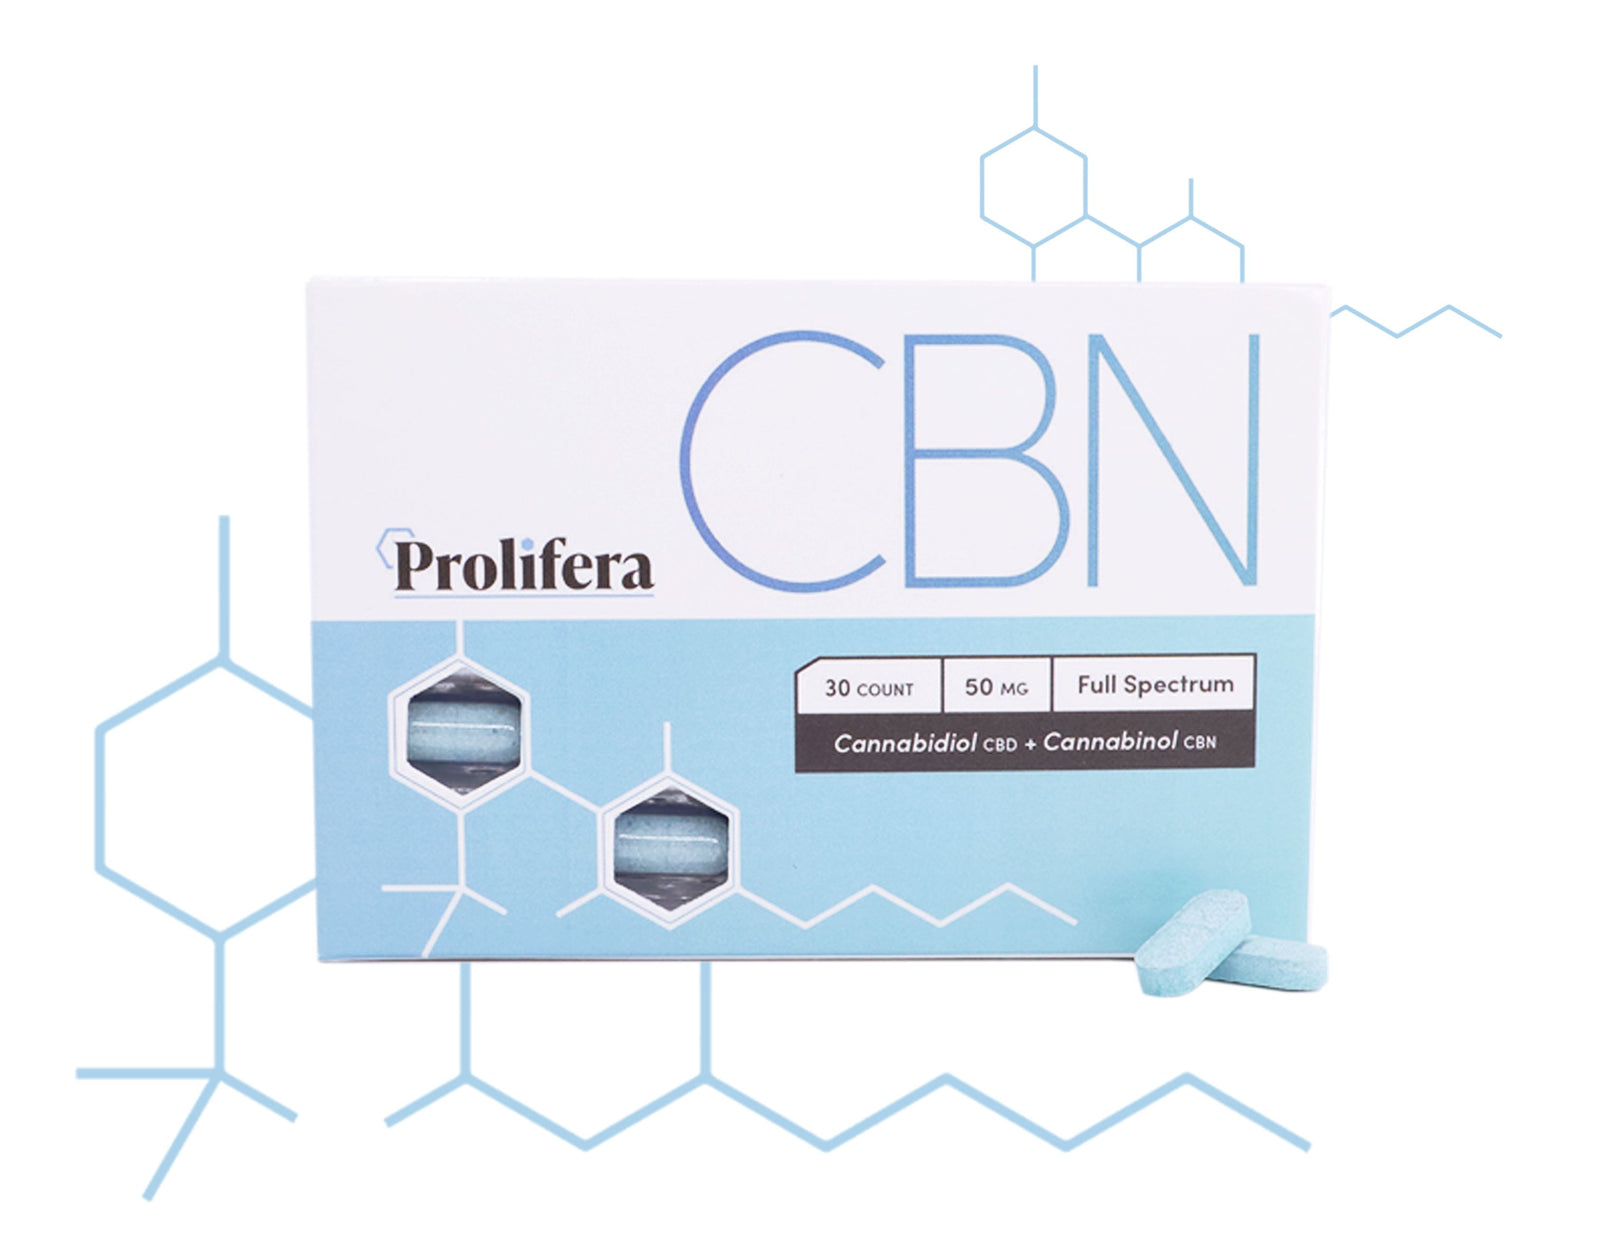 Guide to CBN, the "Sleeper Cannabinoid" by Prolifera